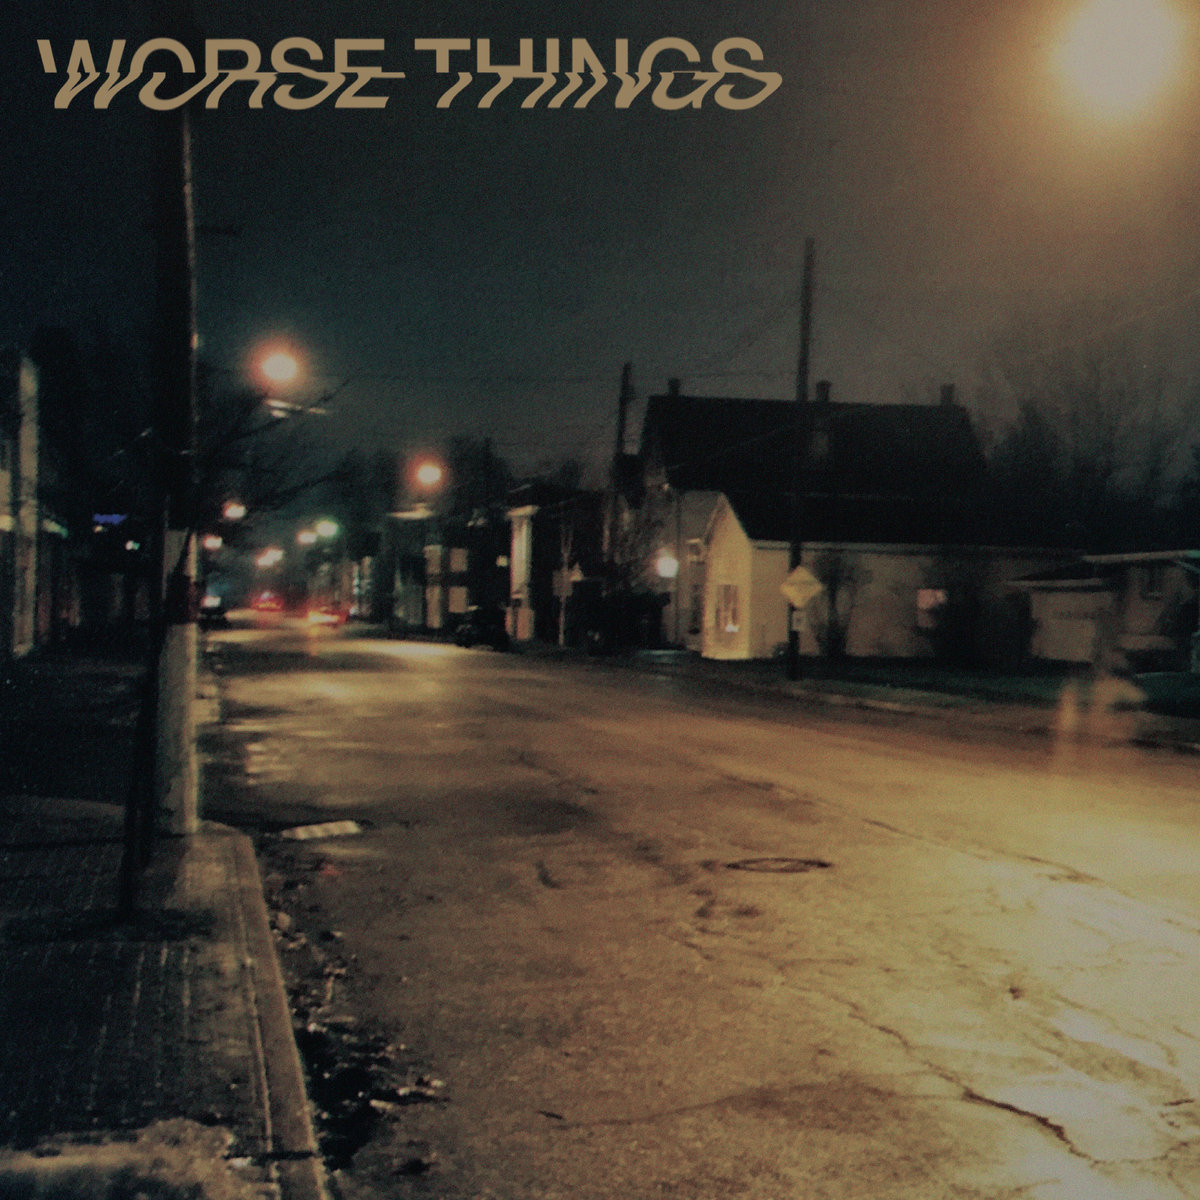 Worse Things – Self-Titled